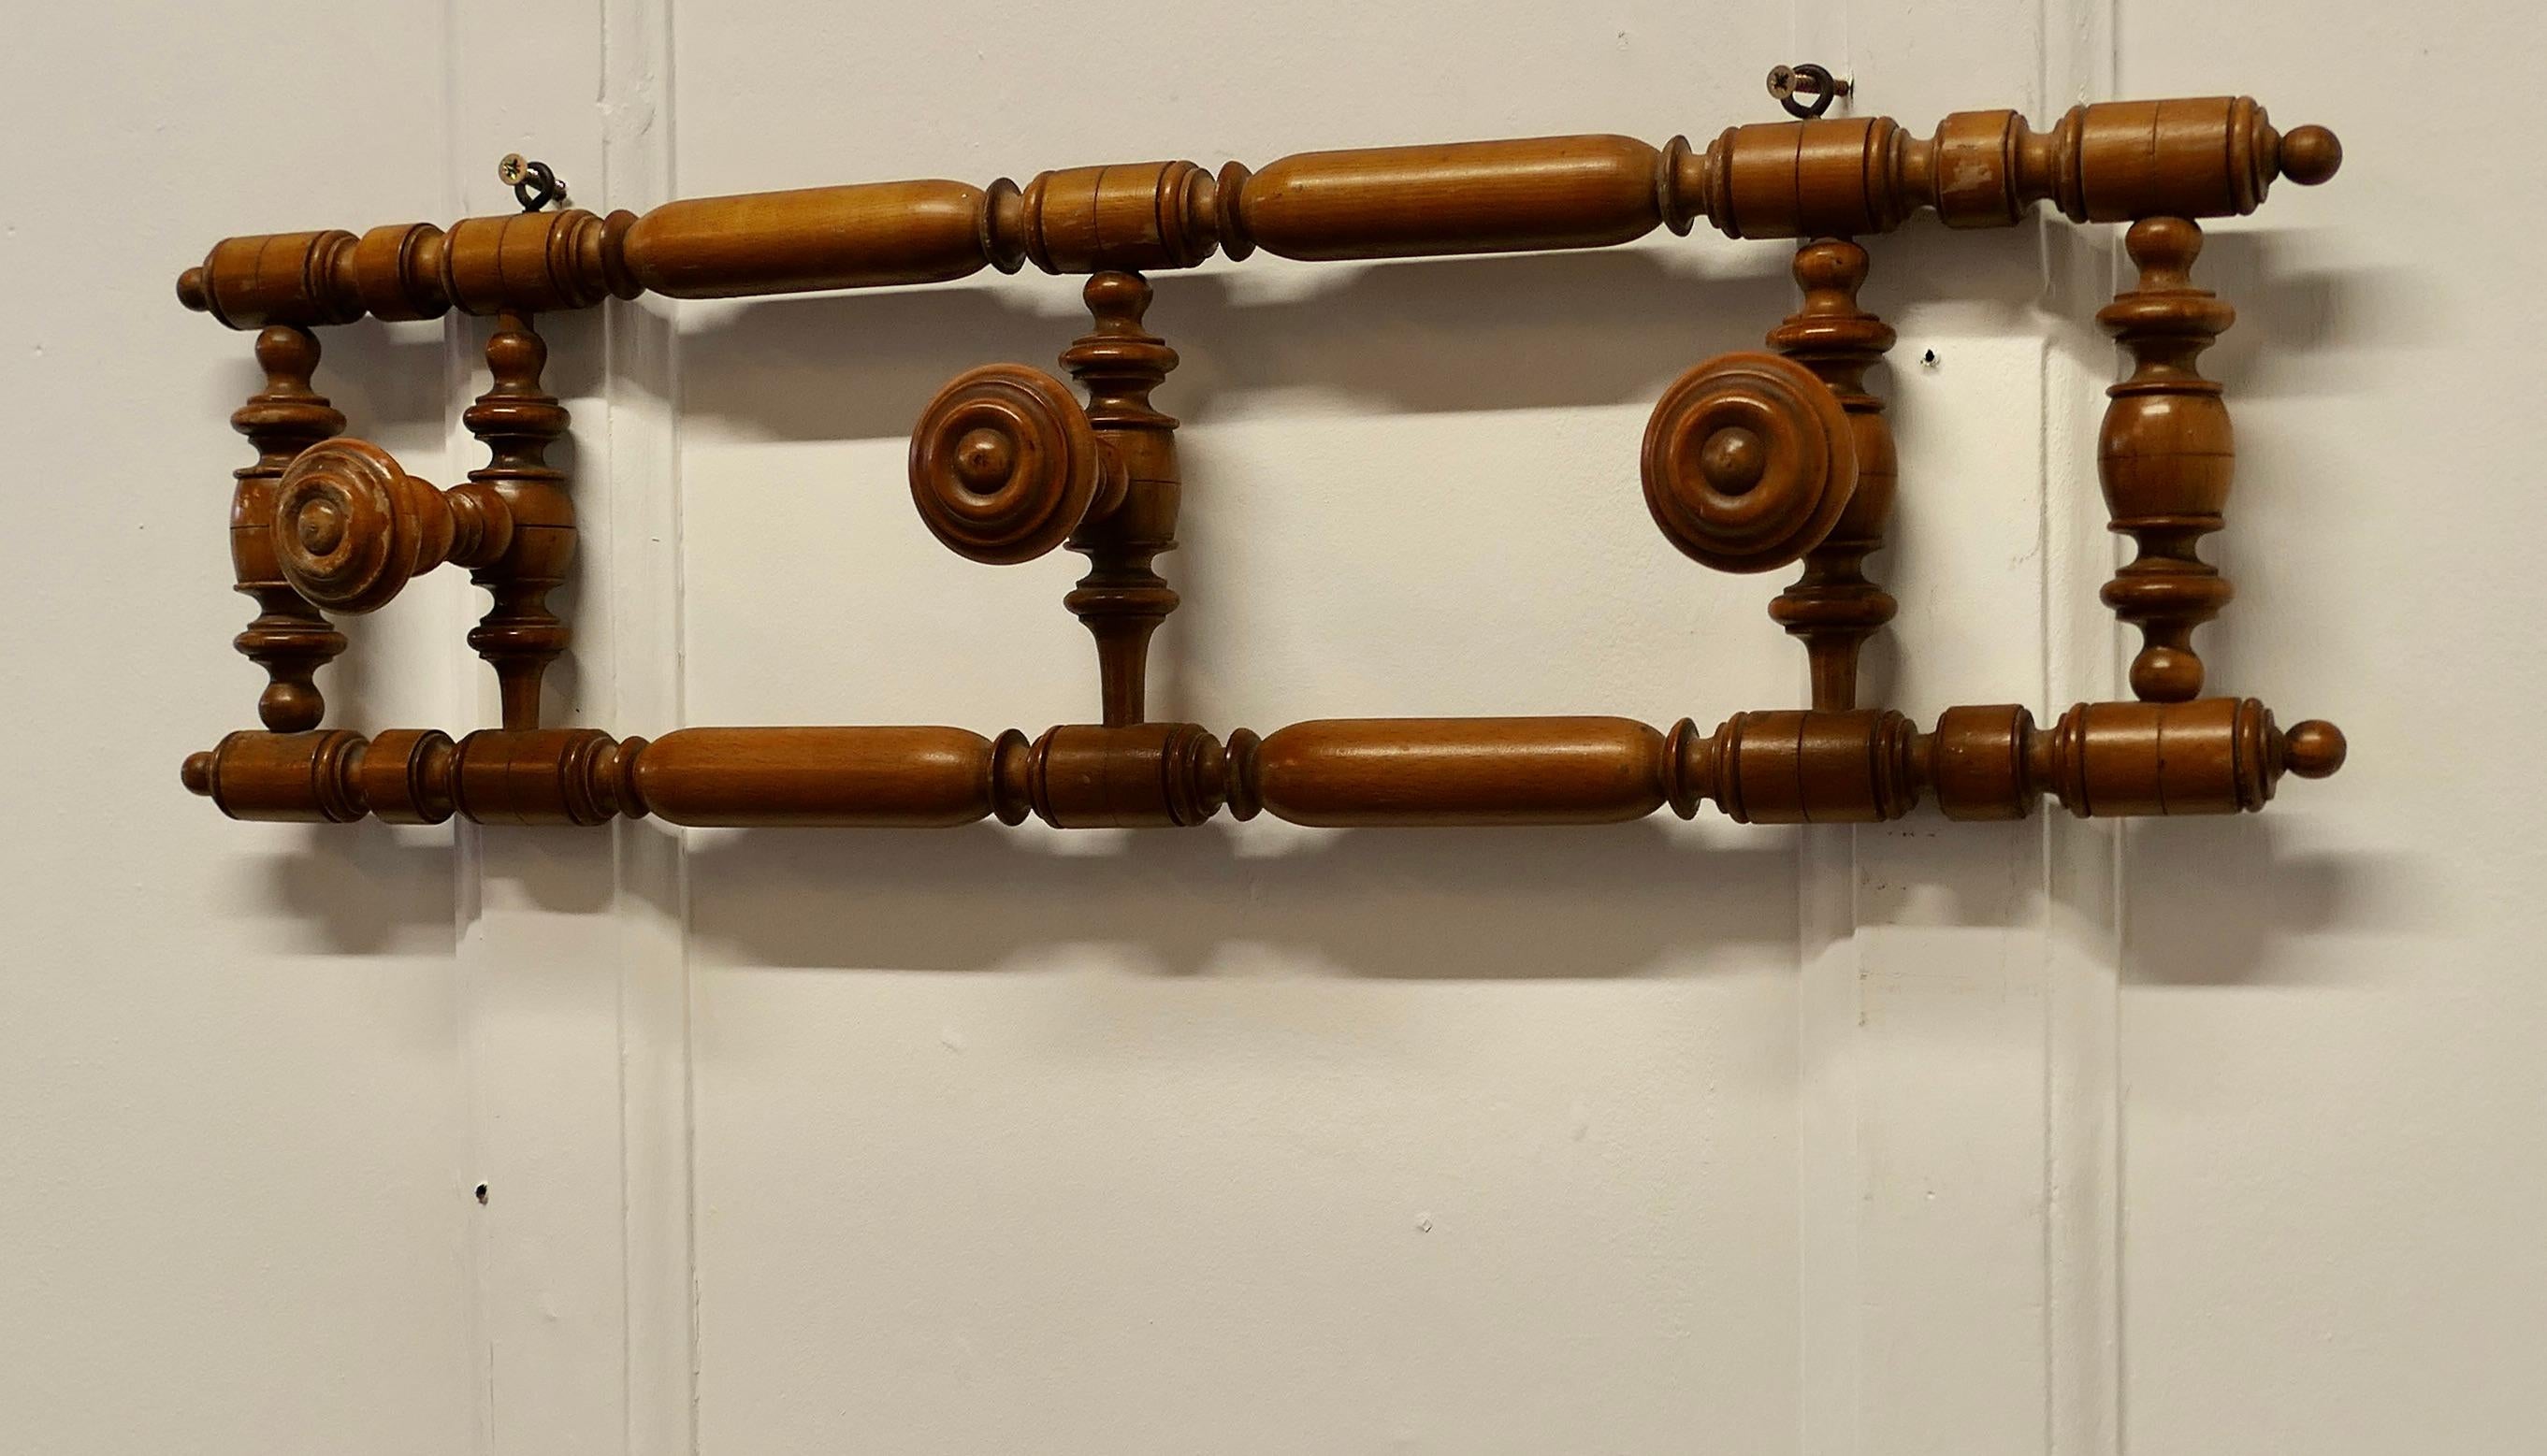 French Turned Beech Hat and Coat Rack

This is a pretty piece it is a wall hanging piece, it has turned round hooks for coats or hats it would make a good hall piece where space is limited as the hooks can be folded flat against the wall
This a